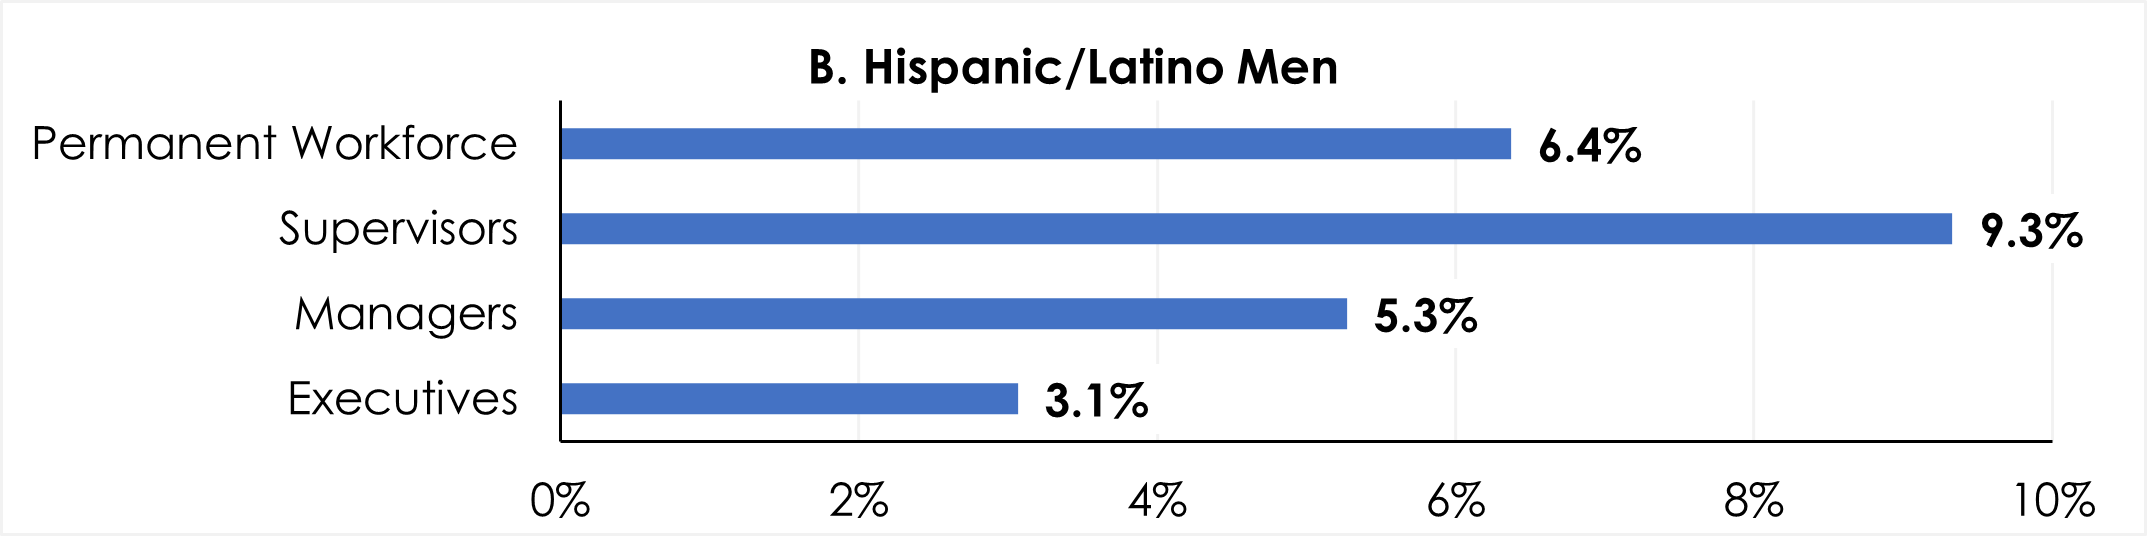 Figure 6B shows that, compared to the permanent workforce overall, Hispanic and Latino men were more likely to be supervisors, but less likely to be managers and executives.  6.4% Hispanic/Latino Men in the Federal sector permanent workforce.  9.3%Hispanic/Latino Men are supervisors in the Federal sector.  5.3% Hispanic/Latino Men are managers in the Federal sector.  3.1% Hispanic/Latino Men are executives in the Federal sector.